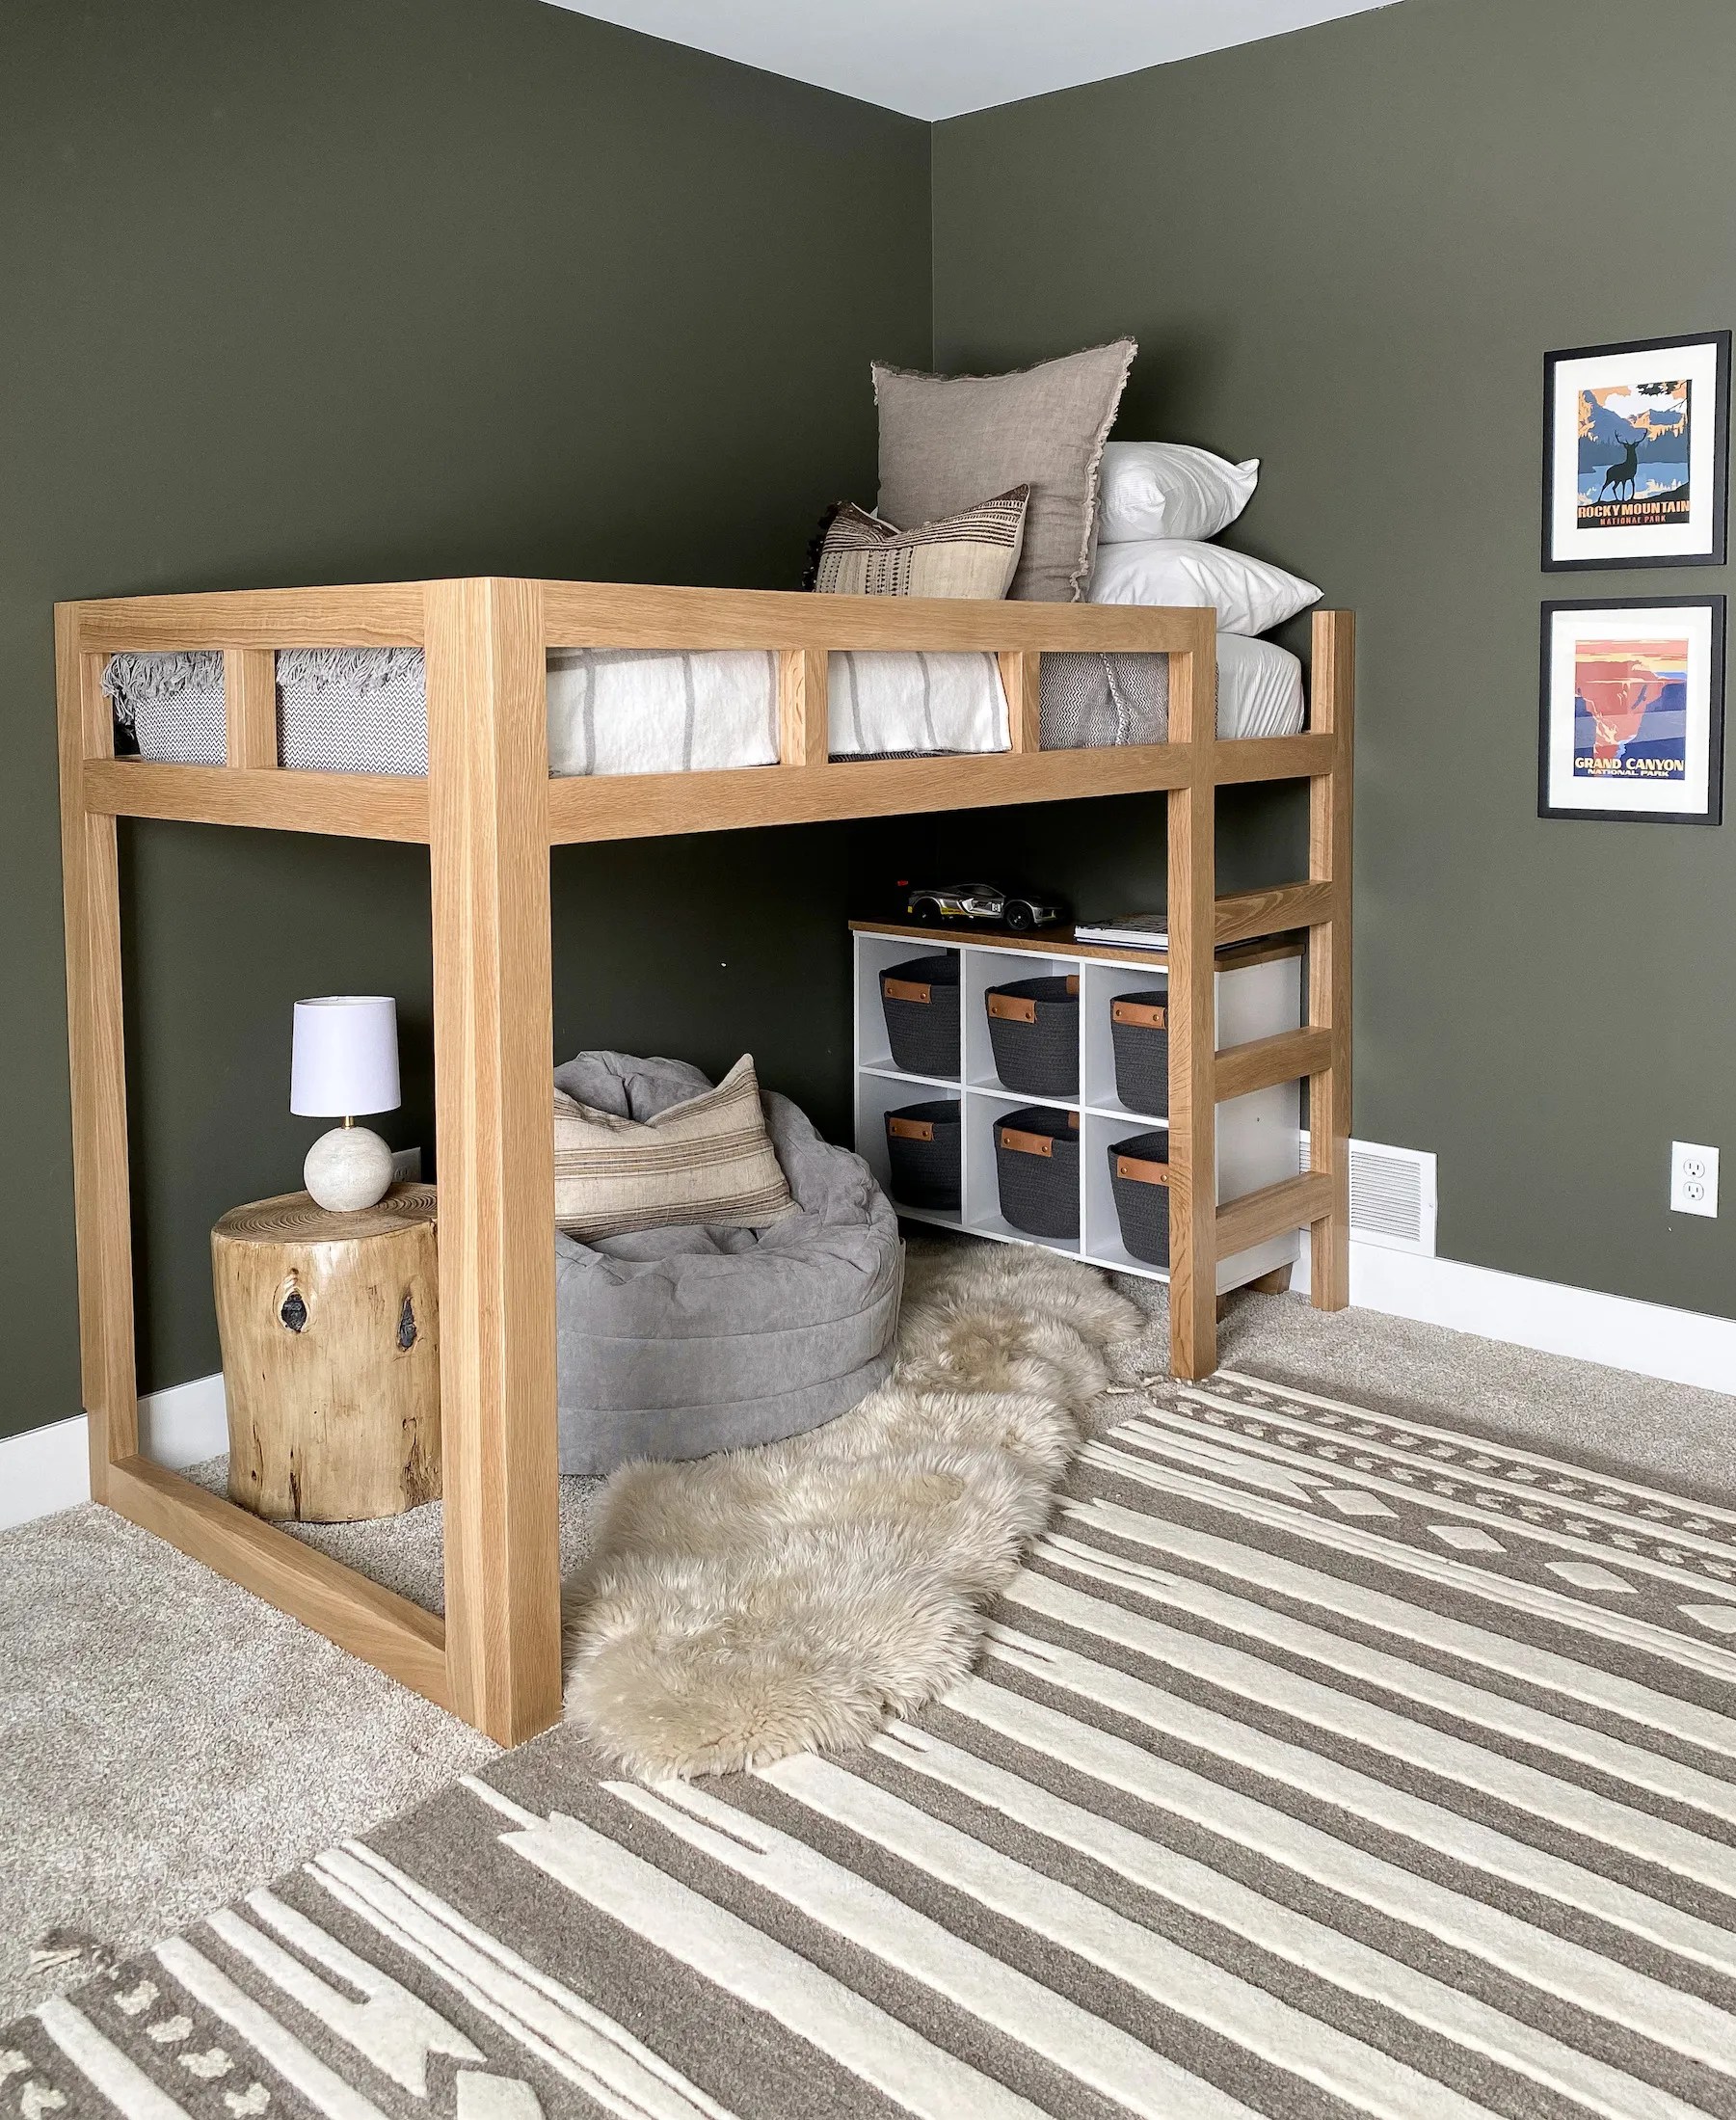 how to build a bunk bed